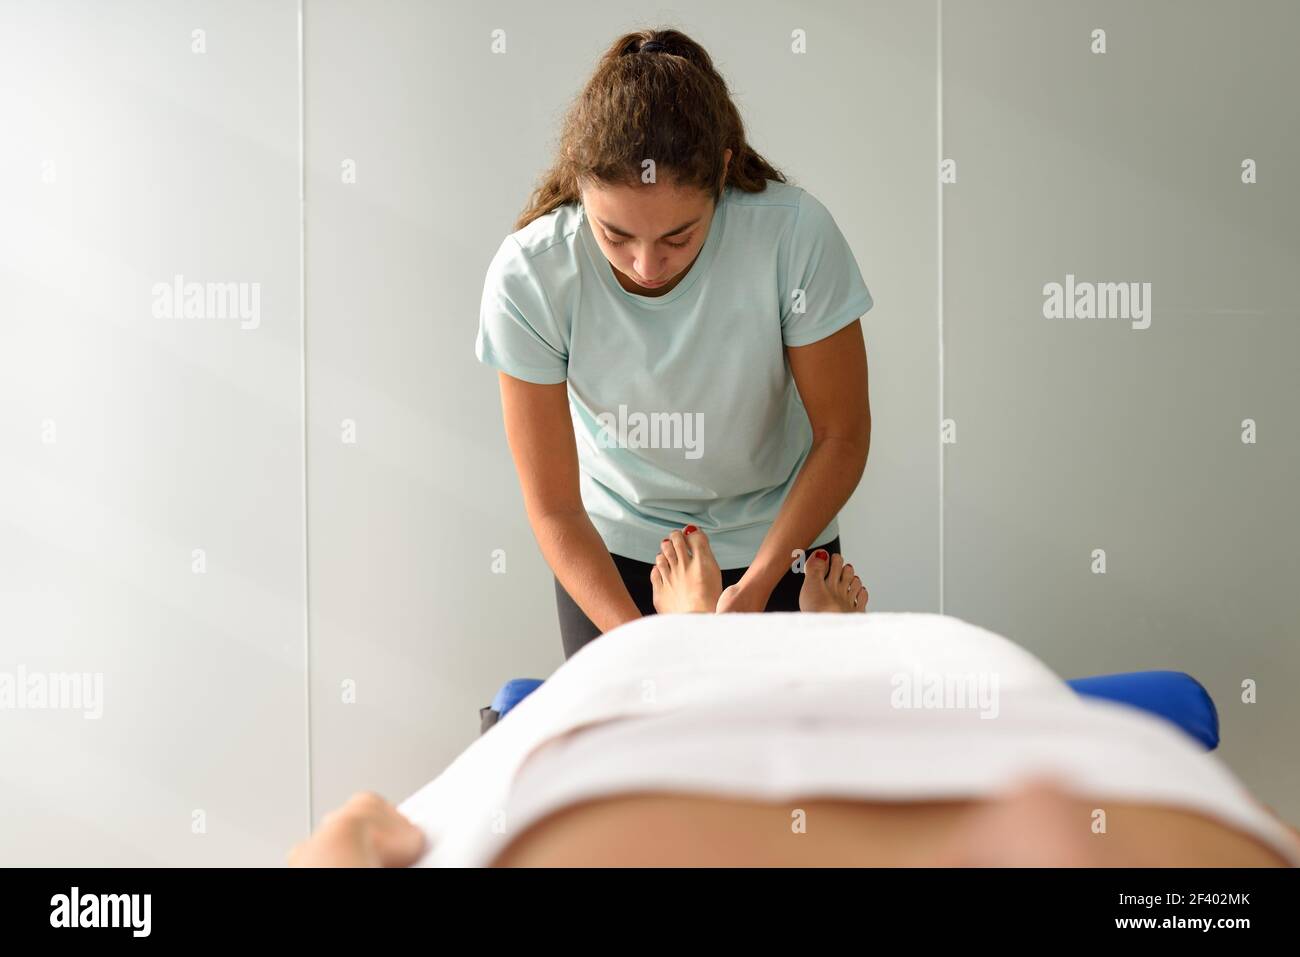 Medical massage at the foot in a physiotherapy center. Female physiotherapist inspecting her patient. Stock Photo